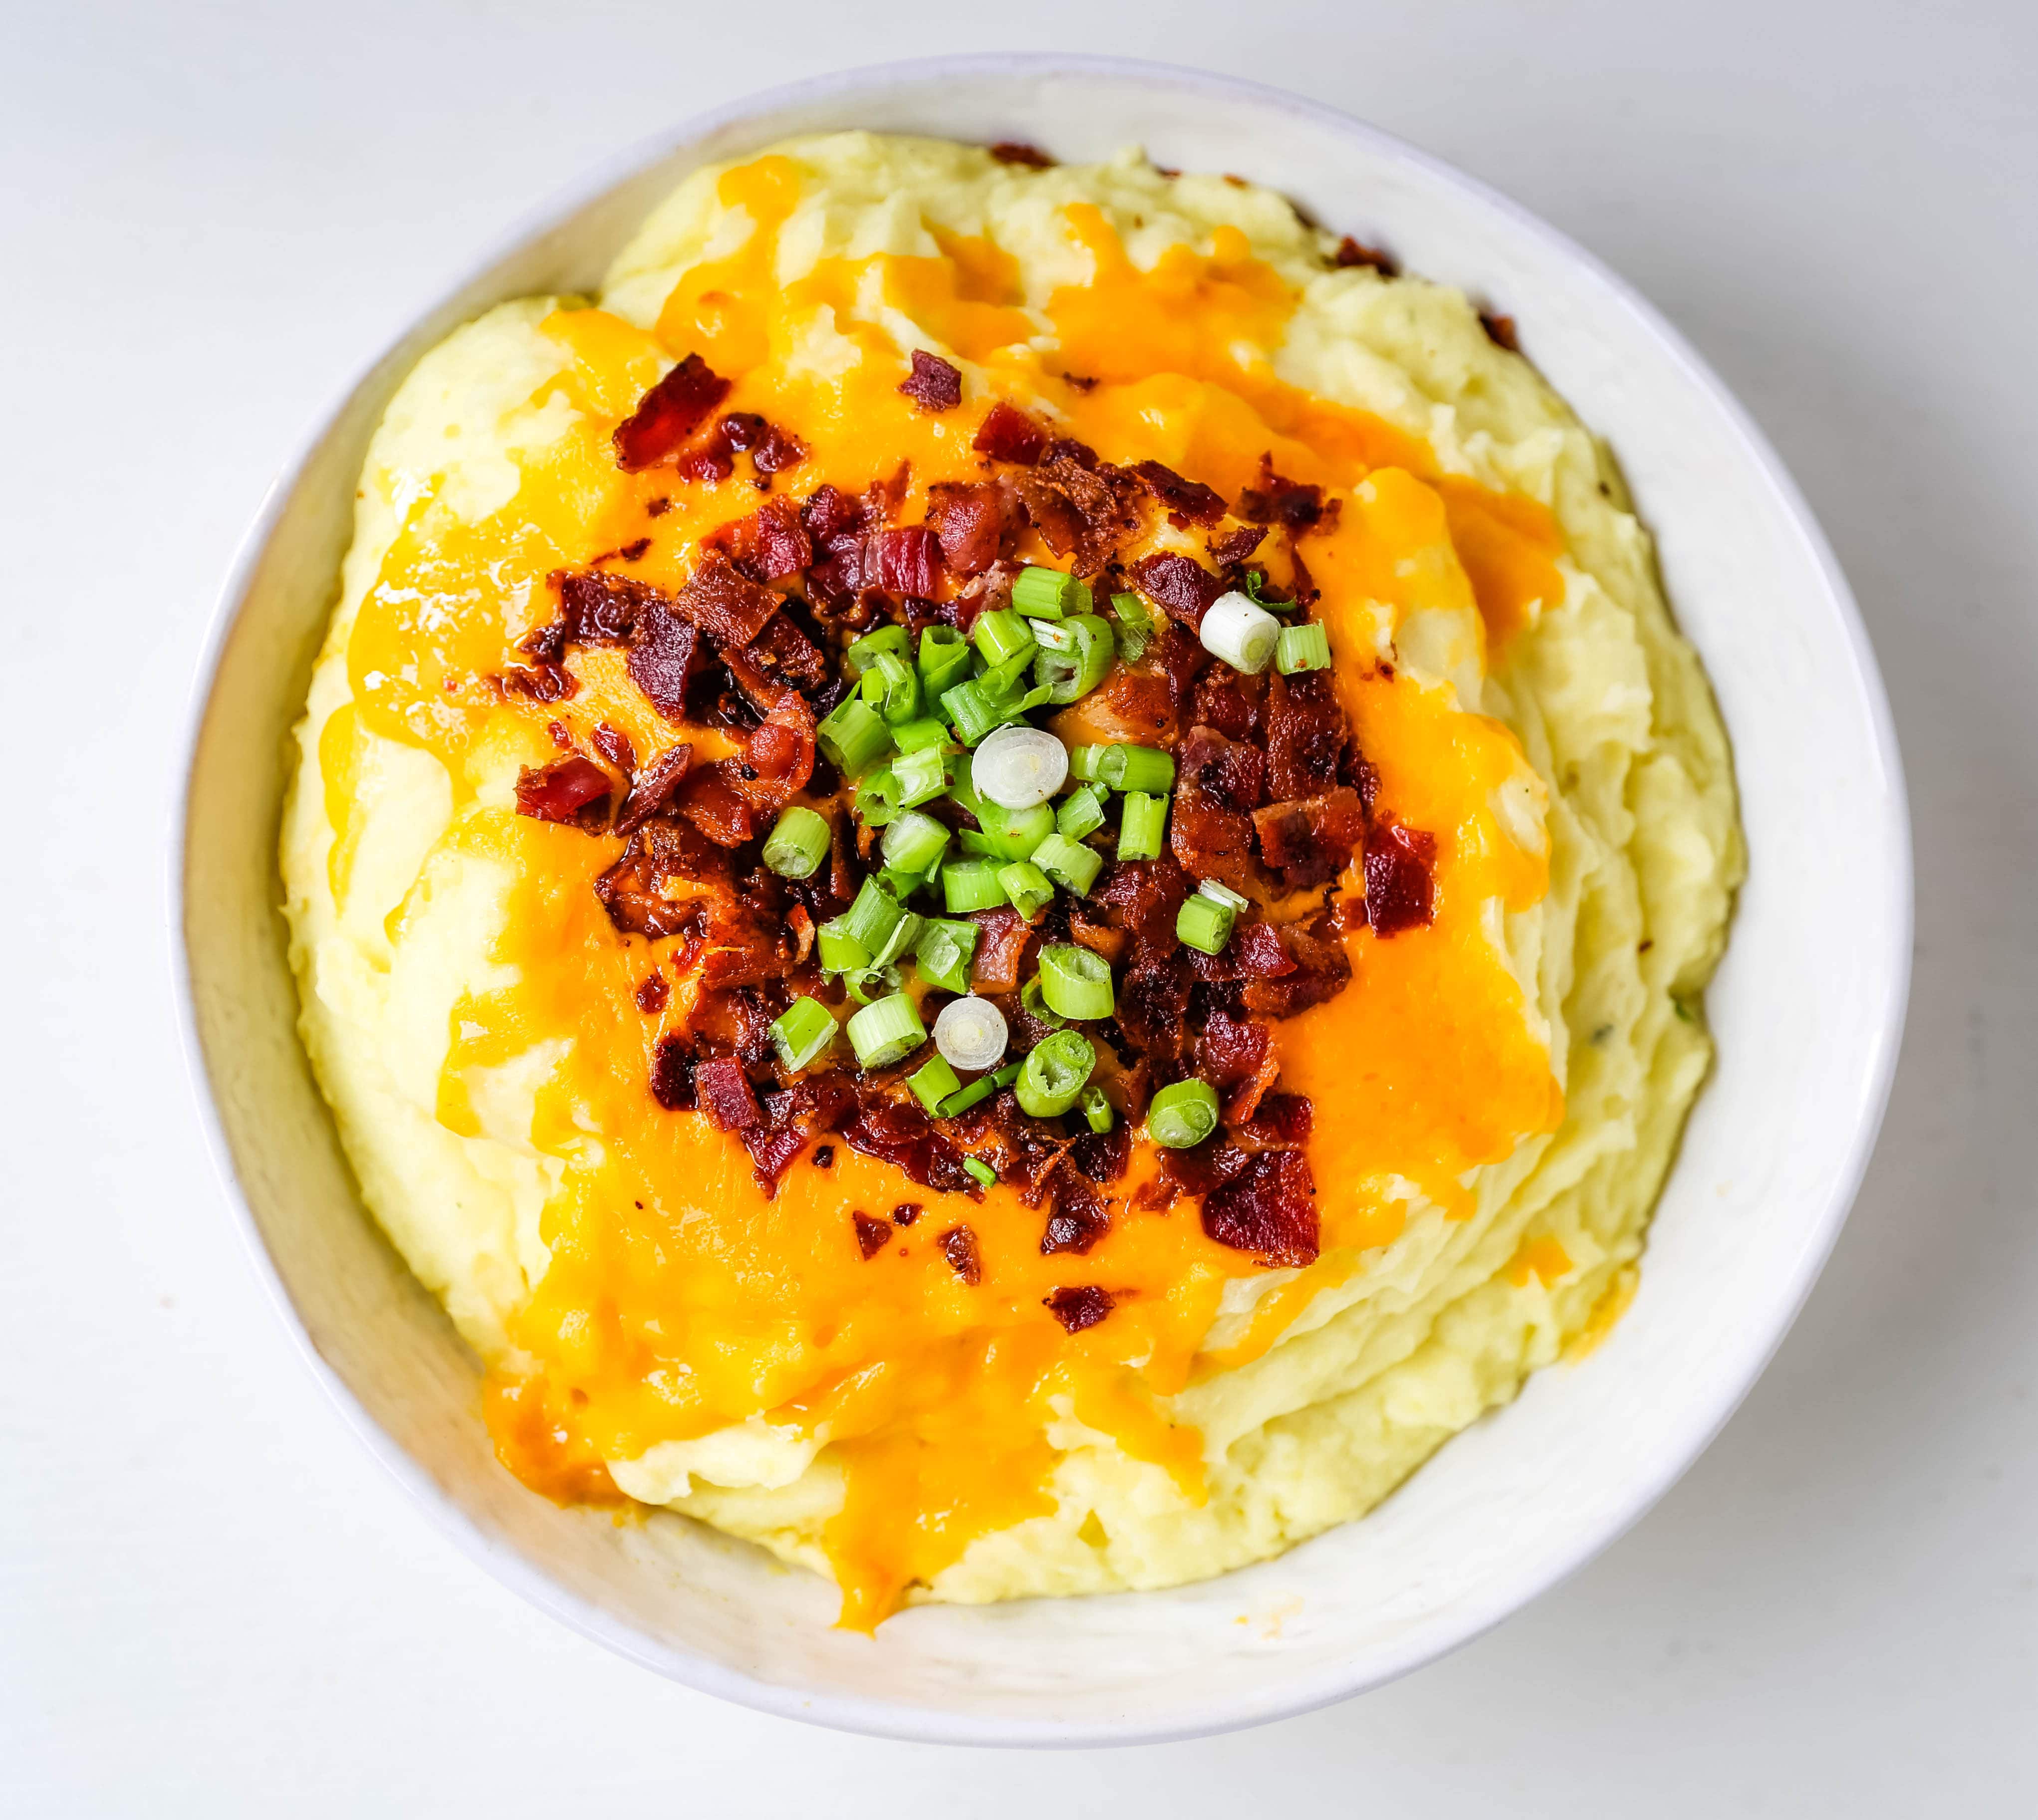 Loaded Mashed Potatoes. Creamy buttery mashed potatoes with sour cream, cheddar cheese, crispy bacon, and green onions. The perfect flavorful side dish that everyone loves! #mashedpotatoes #loadedmashedpotatoes #potatoes #sidedish